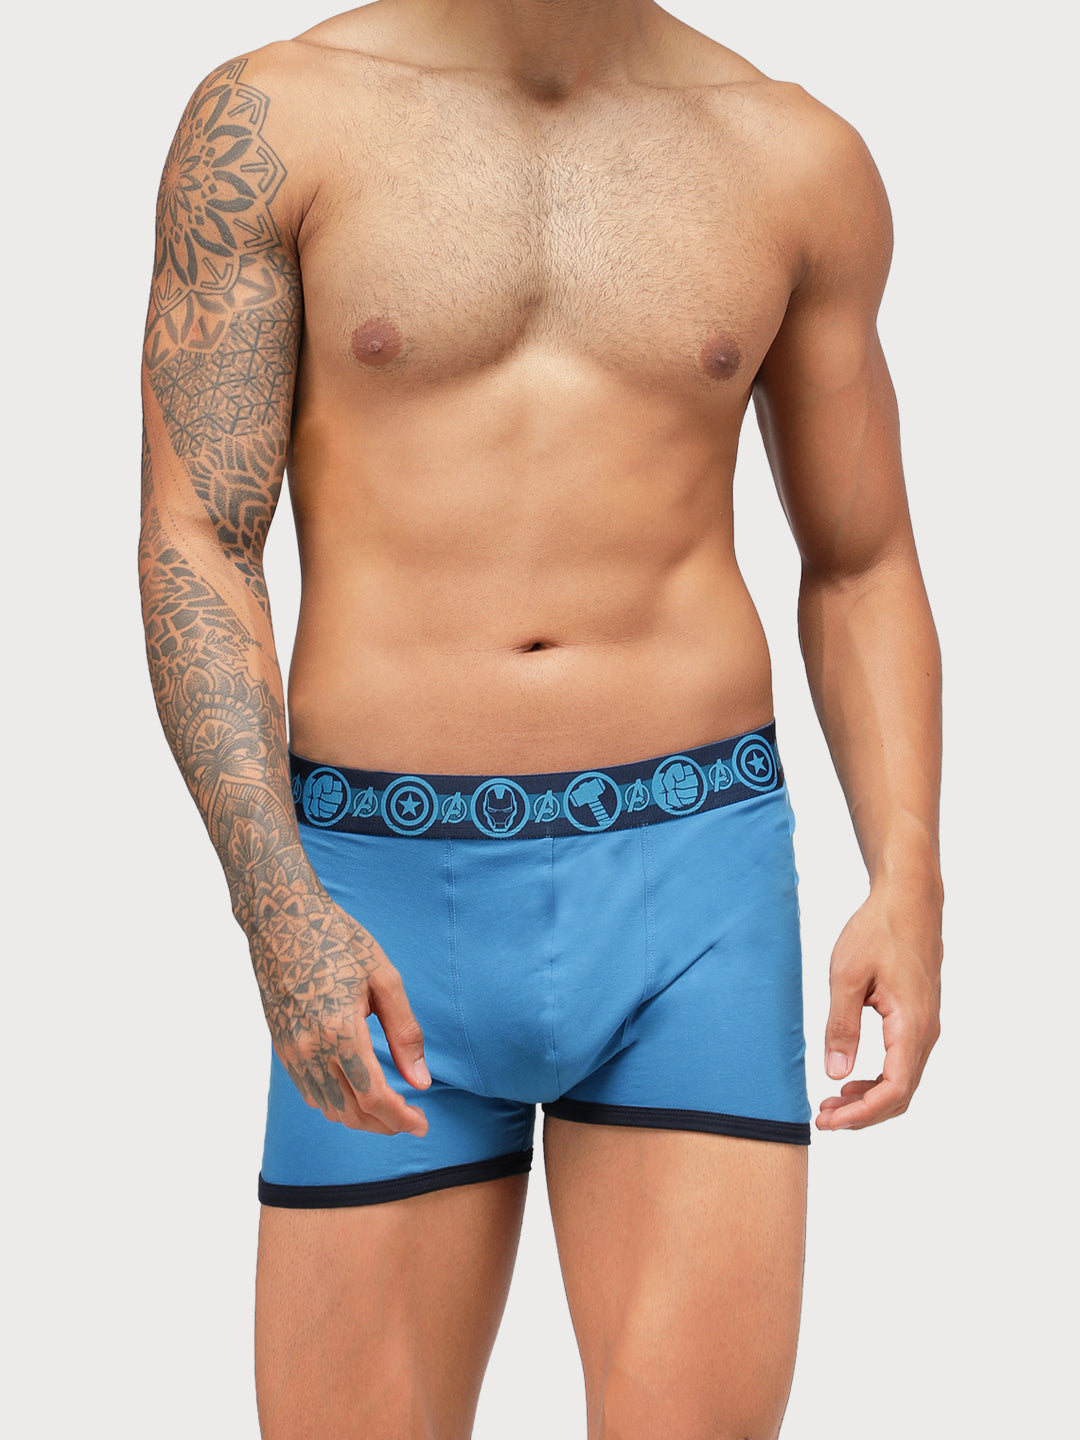 Men Marvel Trunk Chinese Red+ Sky Driver